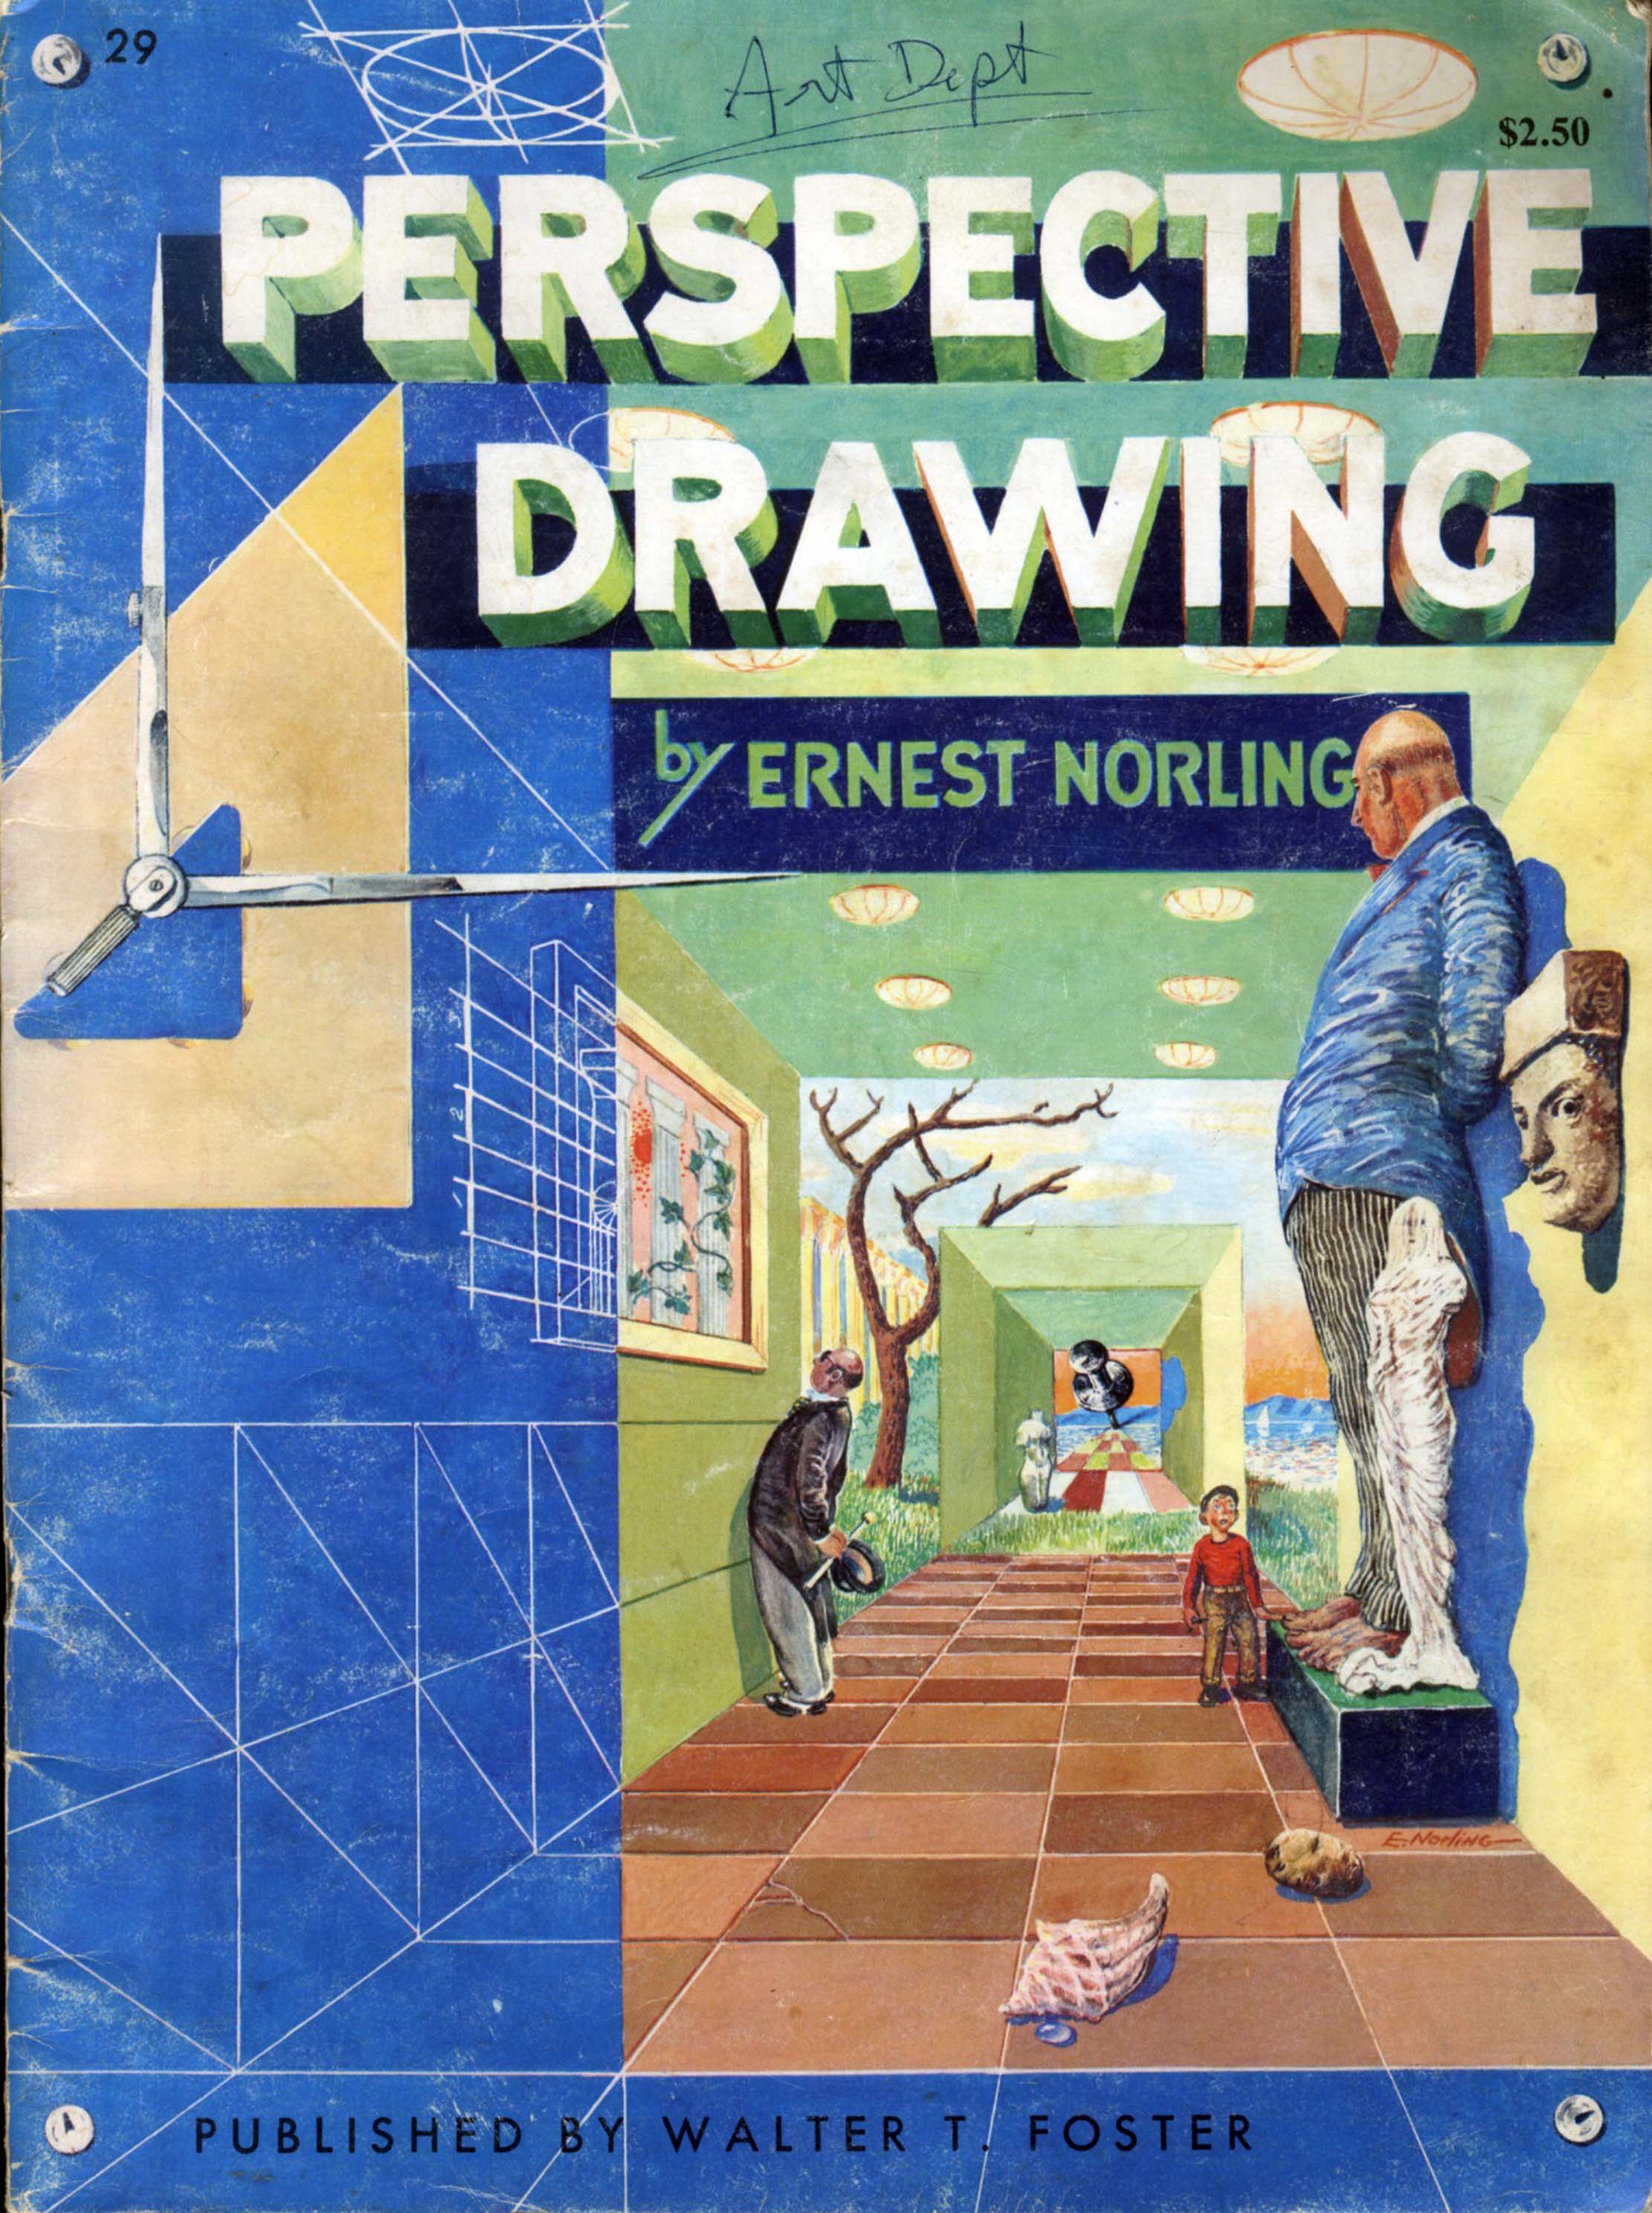 Ernest Norling, Perspective Drawing 1950, a selection of plates